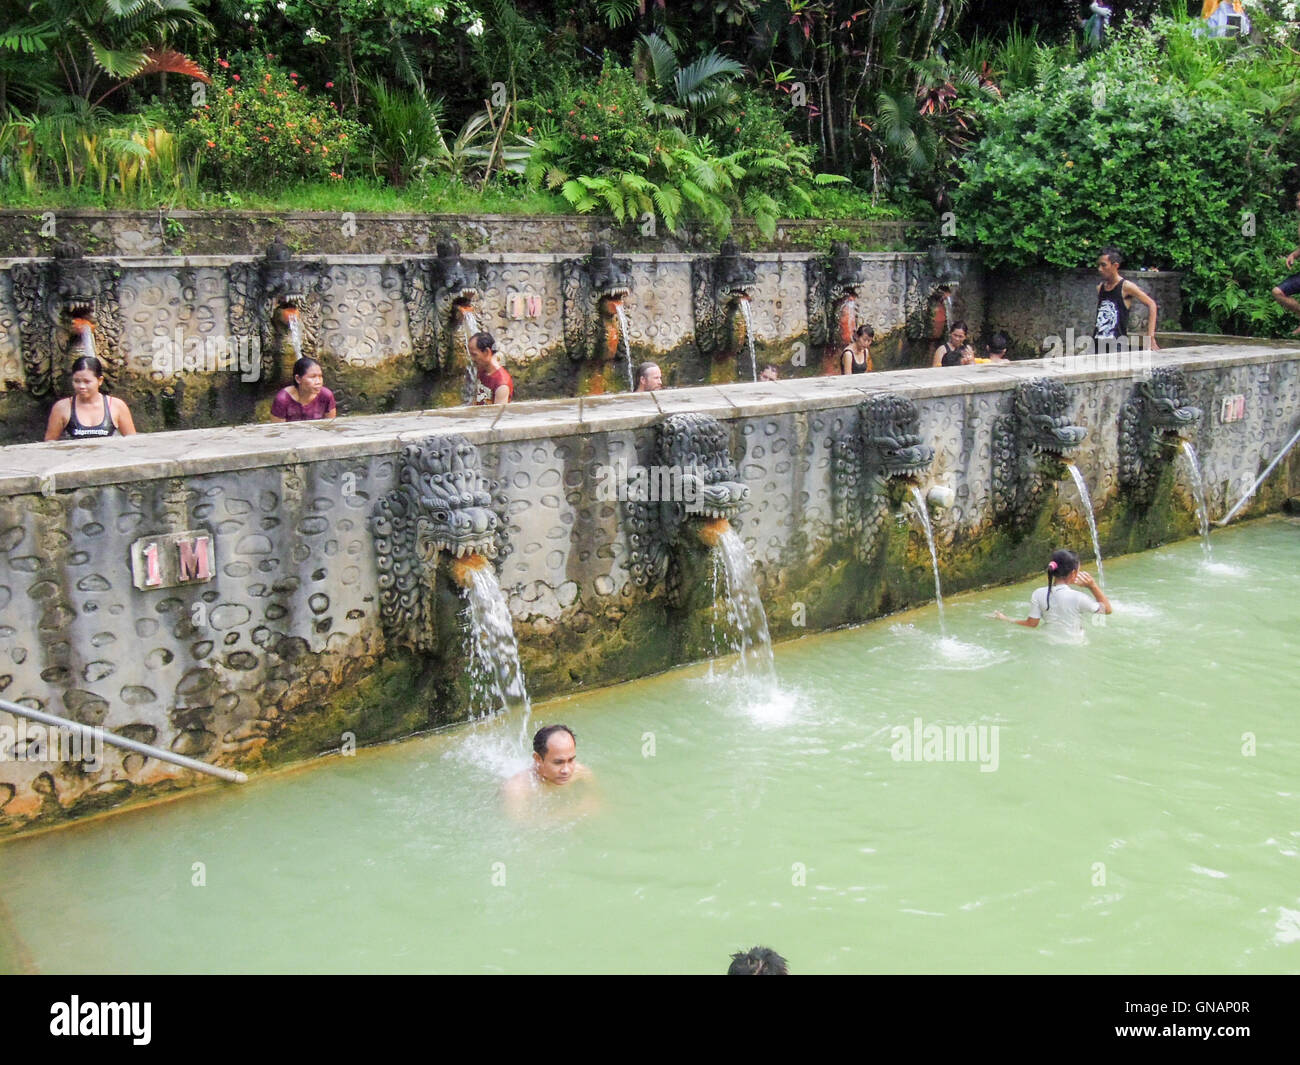 Banjar (Bali), Indonesia - 8 february 2013: People under the water jets of the public pool at Banjar on the island of Bali, Indo Stock Photo